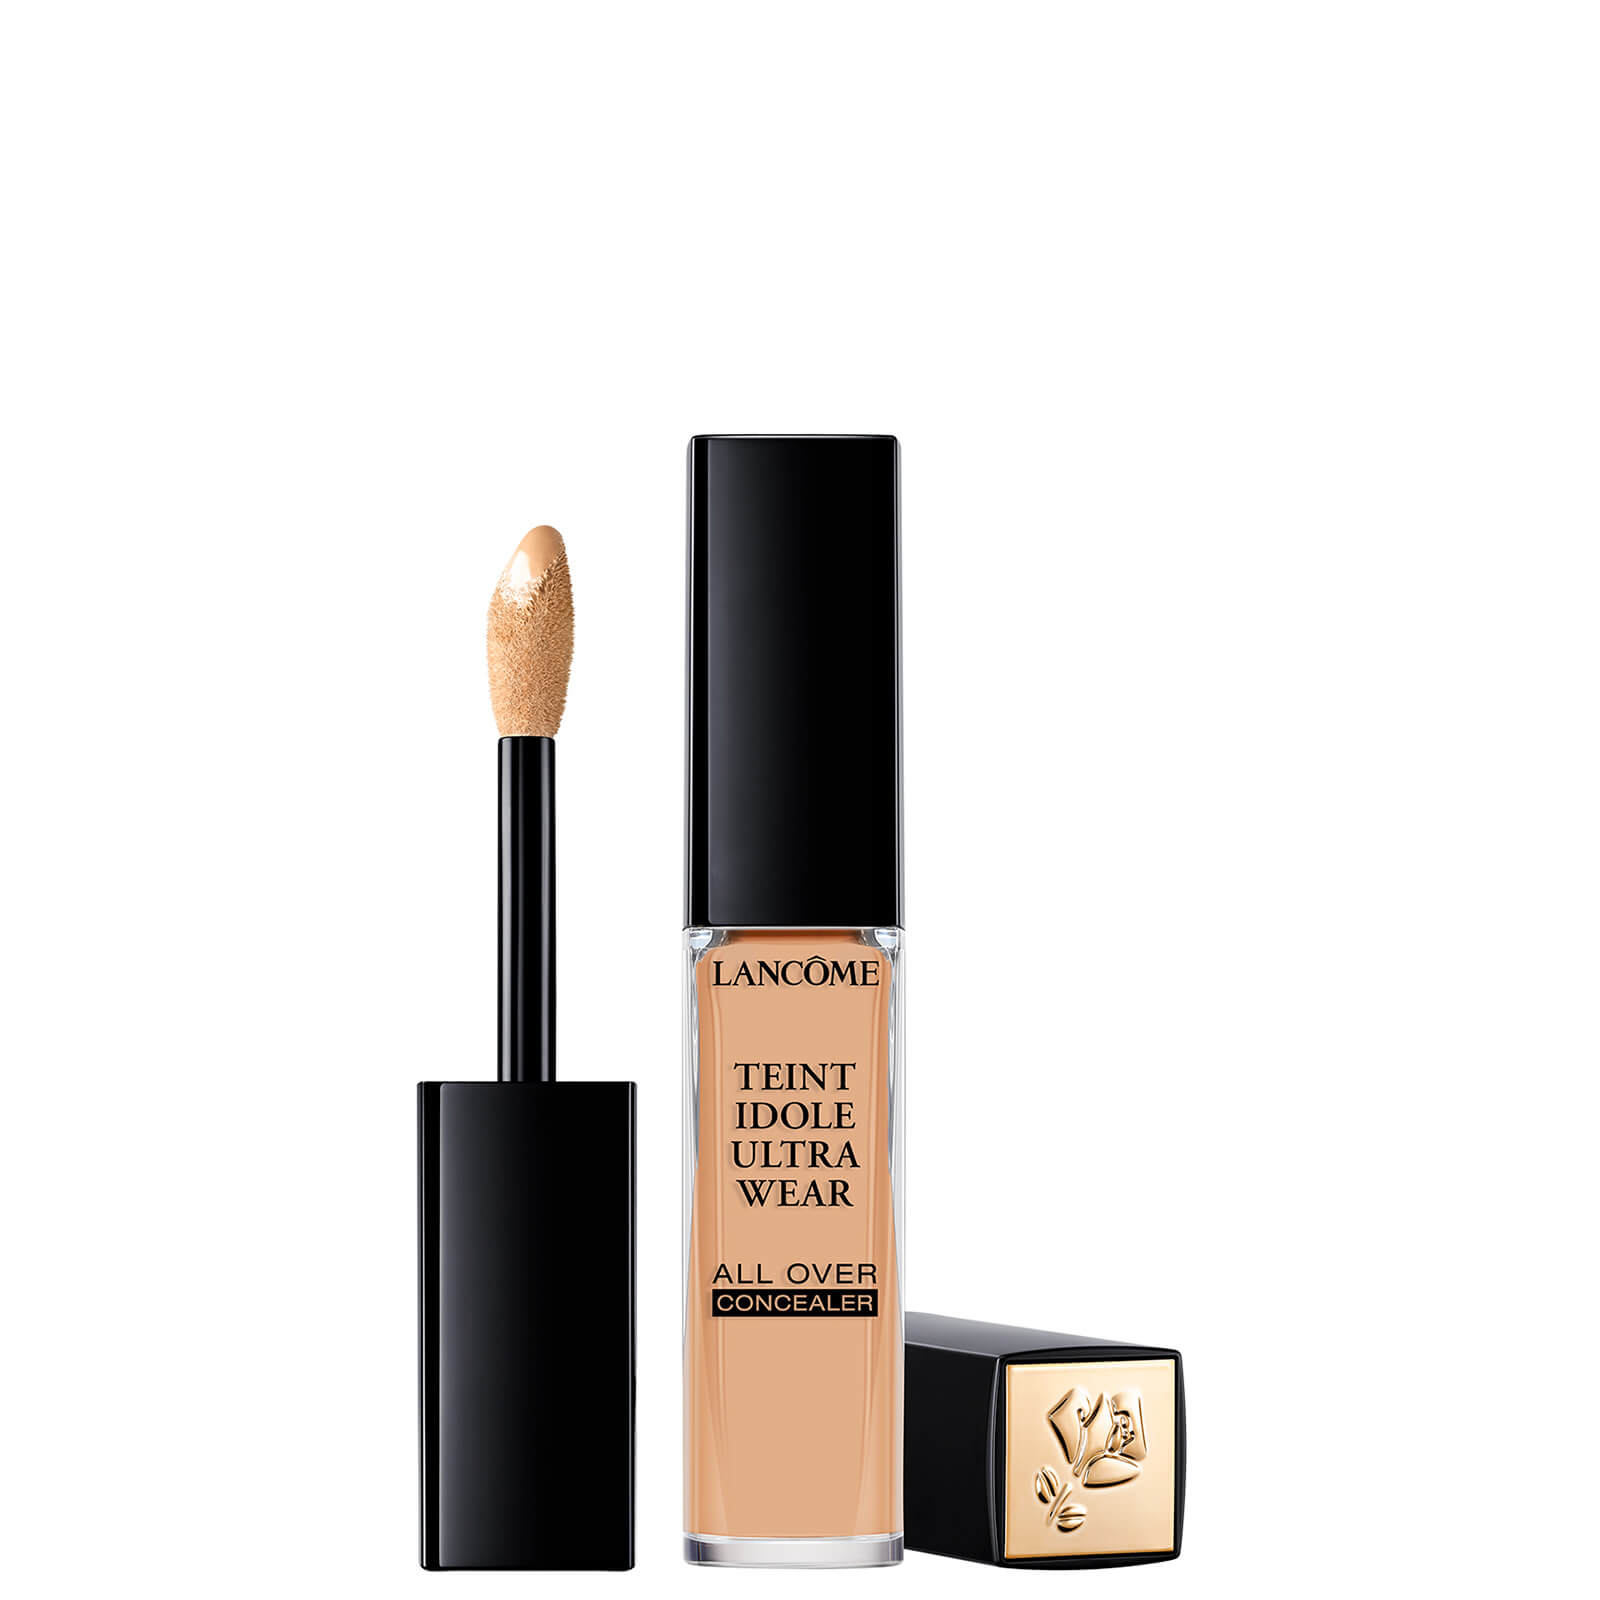 Lancome Teint Idole Ultra Wear All Over Concealer 13ml (Various Shades) - 330 Bisque N 038